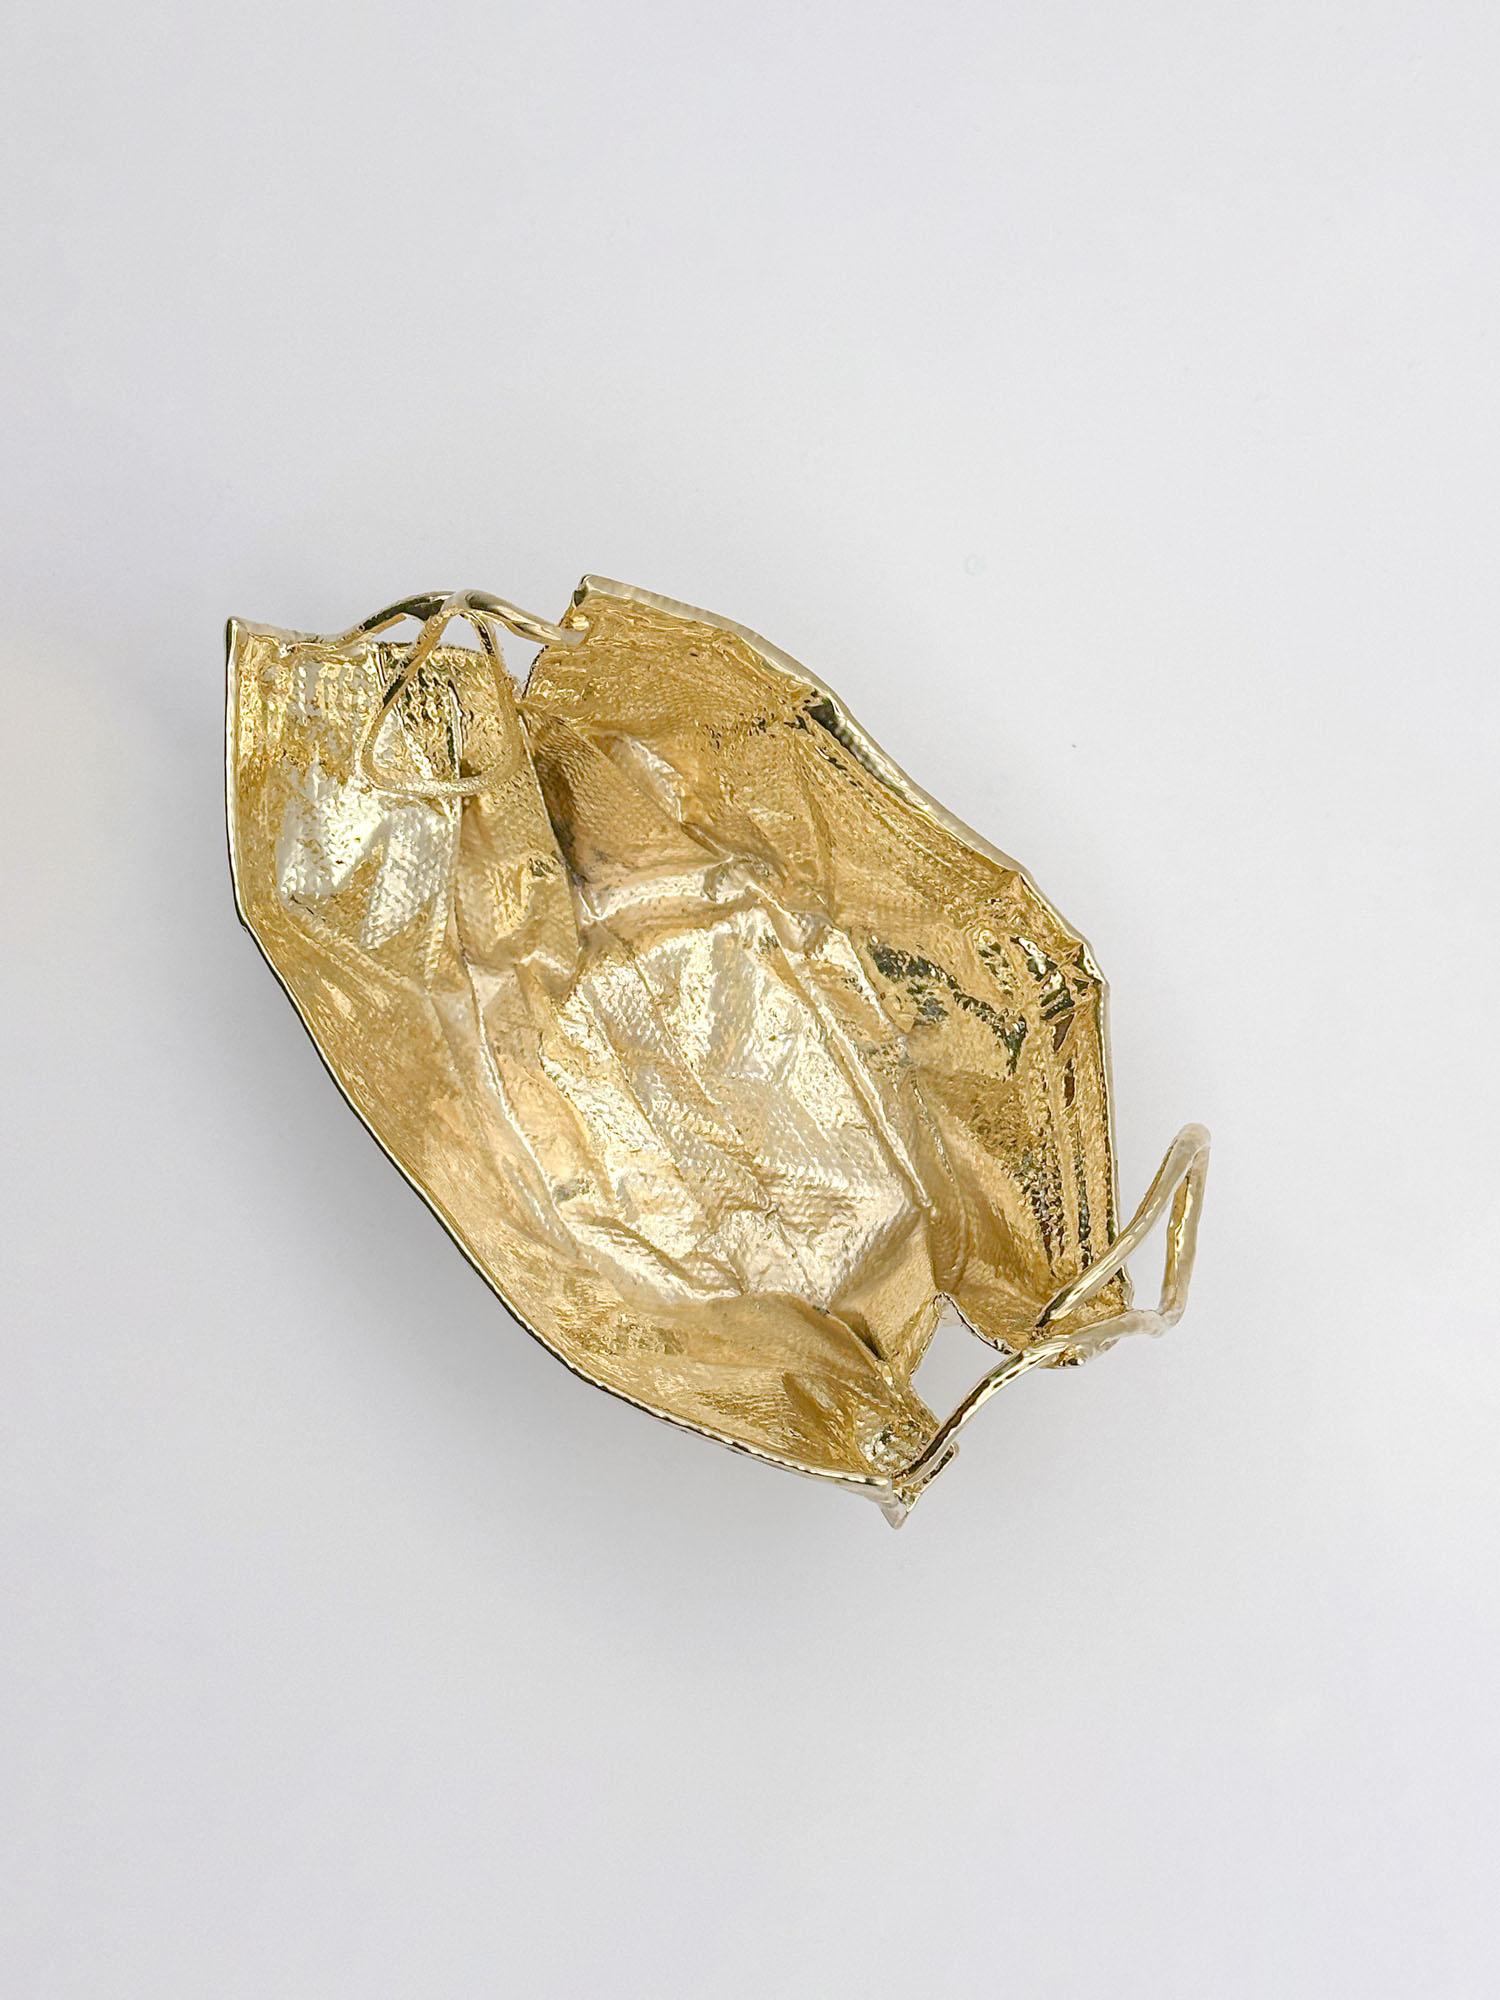 Galvanized Remask Act 017 Gold Art Object Made from Surgical Mask by Enrico Girotti For Sale